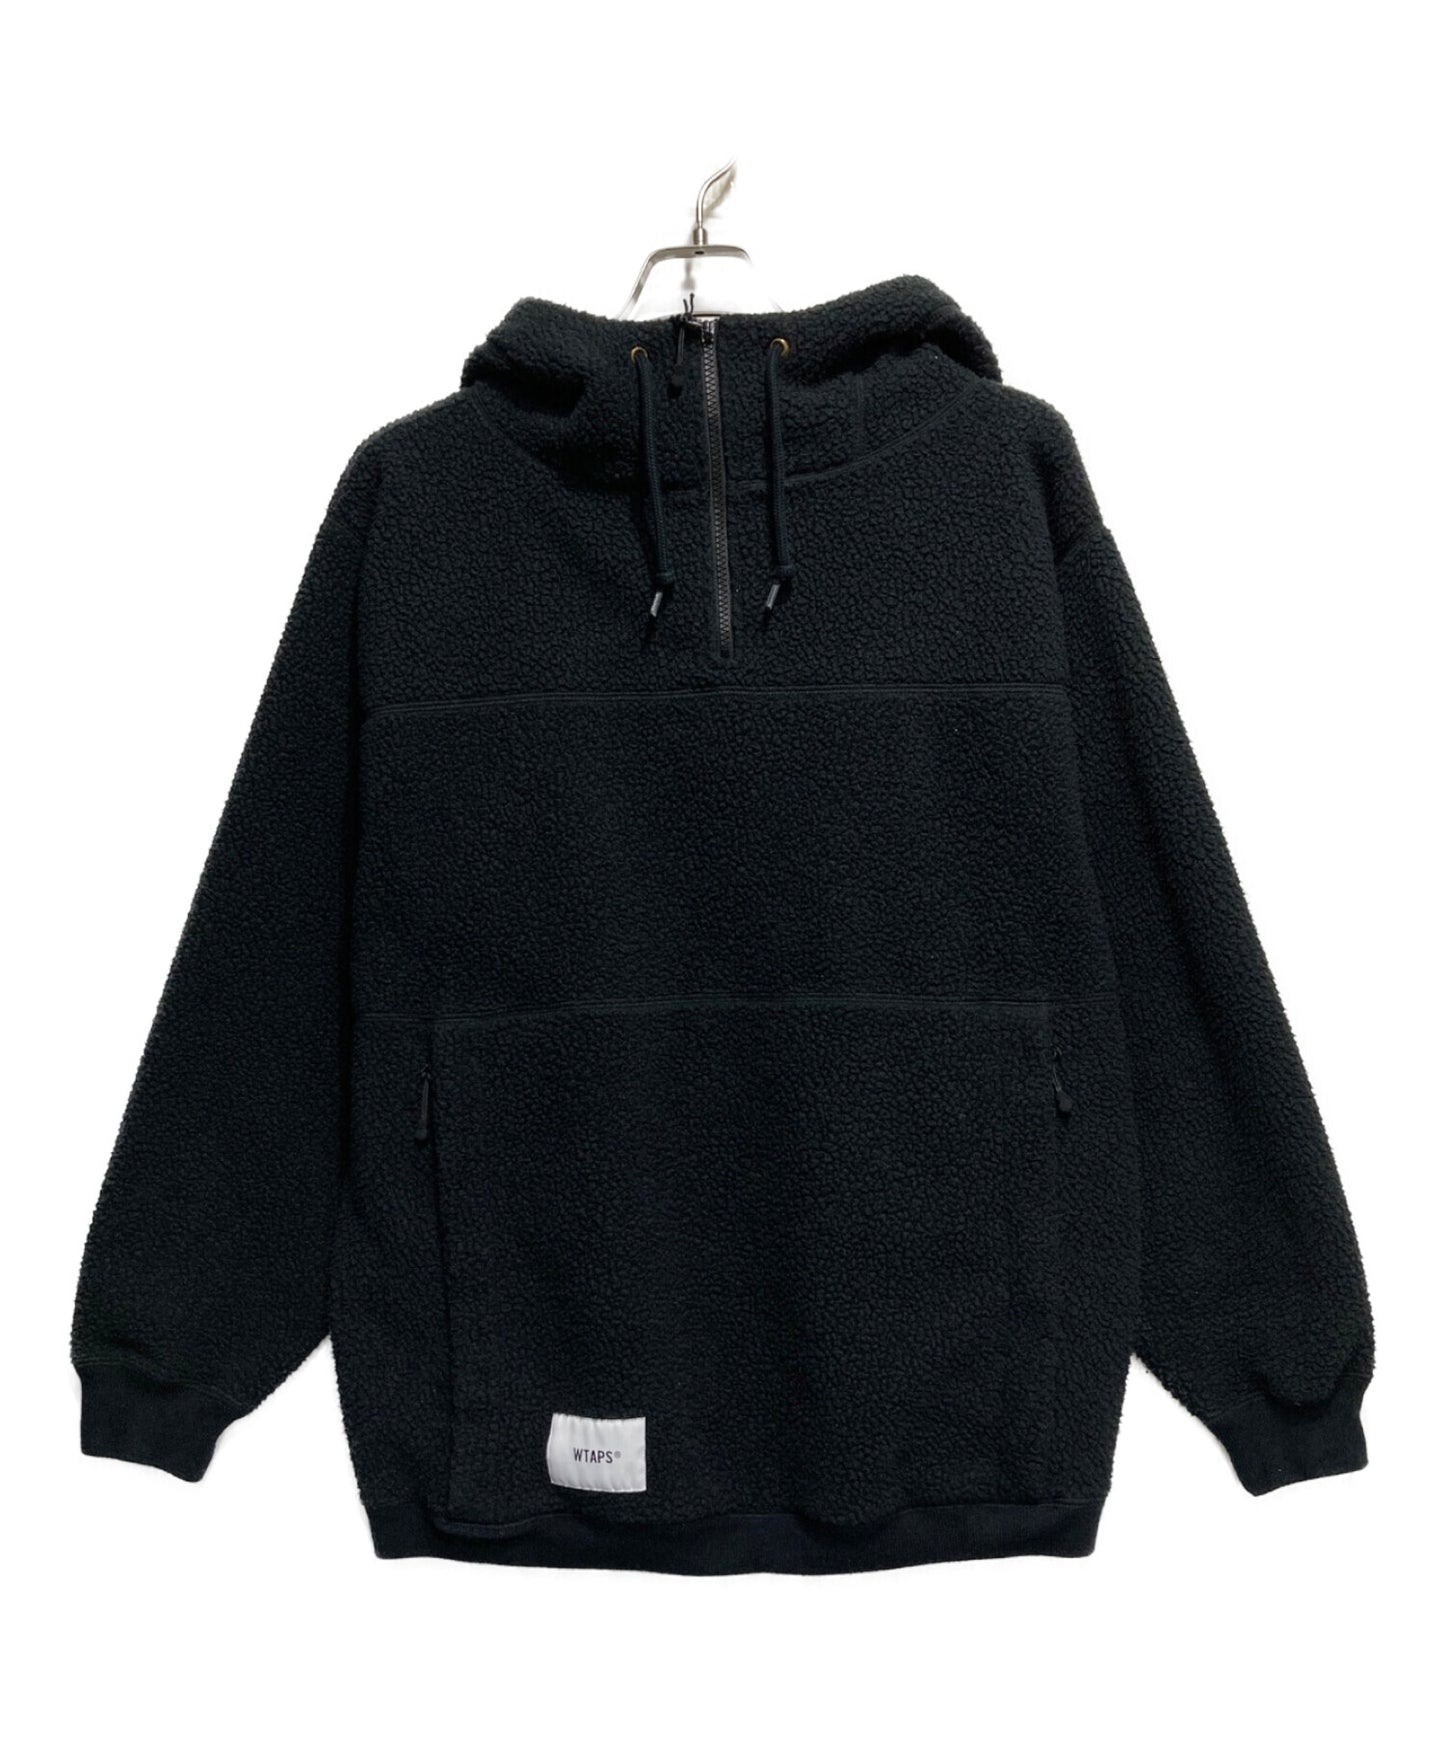 [Pre-owned] WTAPS PINE CONE HOODED FLEECE 202ATDT-CSM34